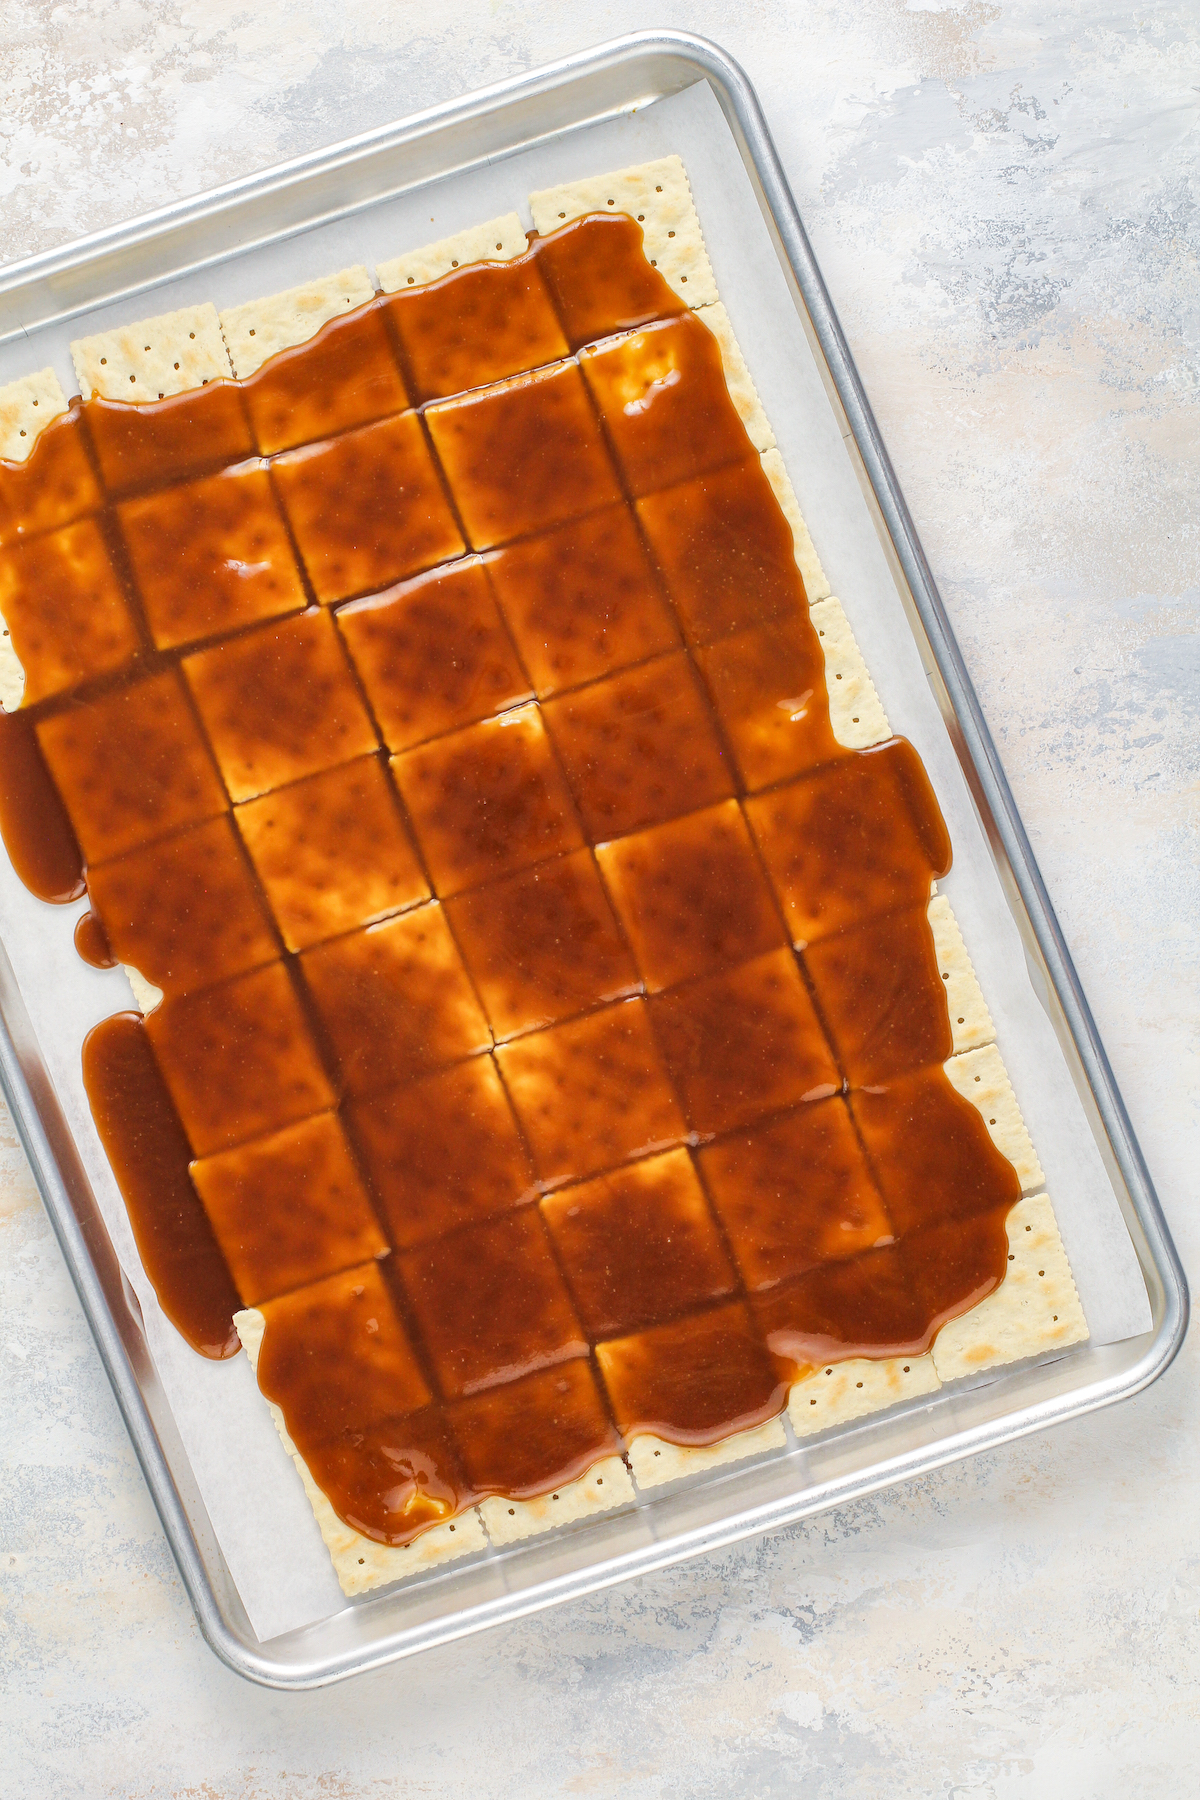 Toffee poured on top of lined up saltine crackers on a cookie sheet lined with parchment paper.